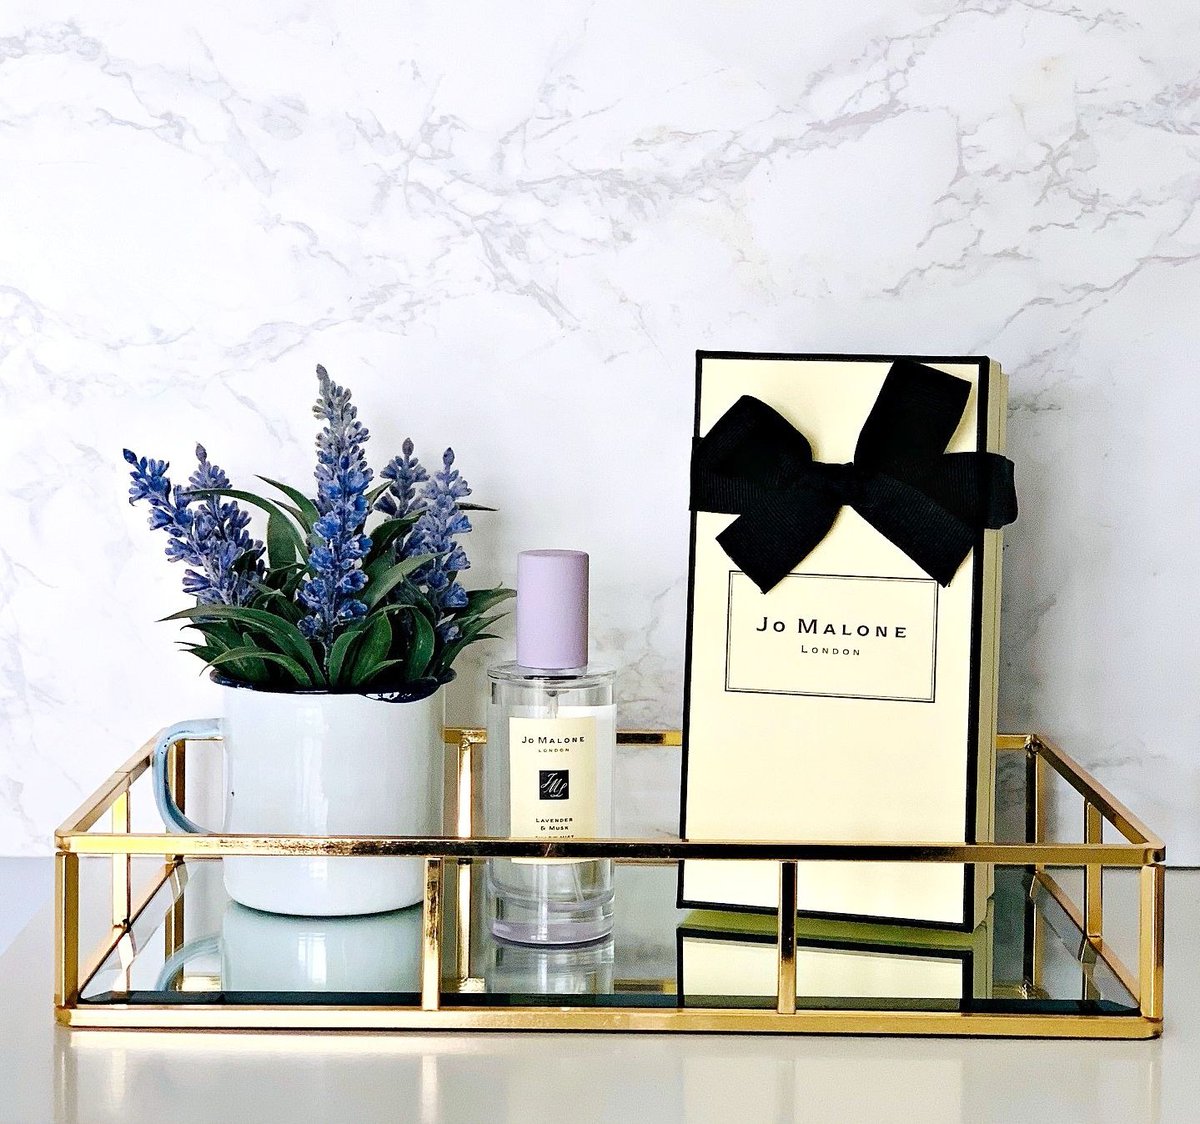 NEW POST! I couldn't resist buying something from the new @JoMaloneLondon lavender range! tinyurl.com/rrc8zq8 @wetweetblogs @TheBloggersPost @theblogsRT @UKBloggers1 #bloggerstribe #bbloggers